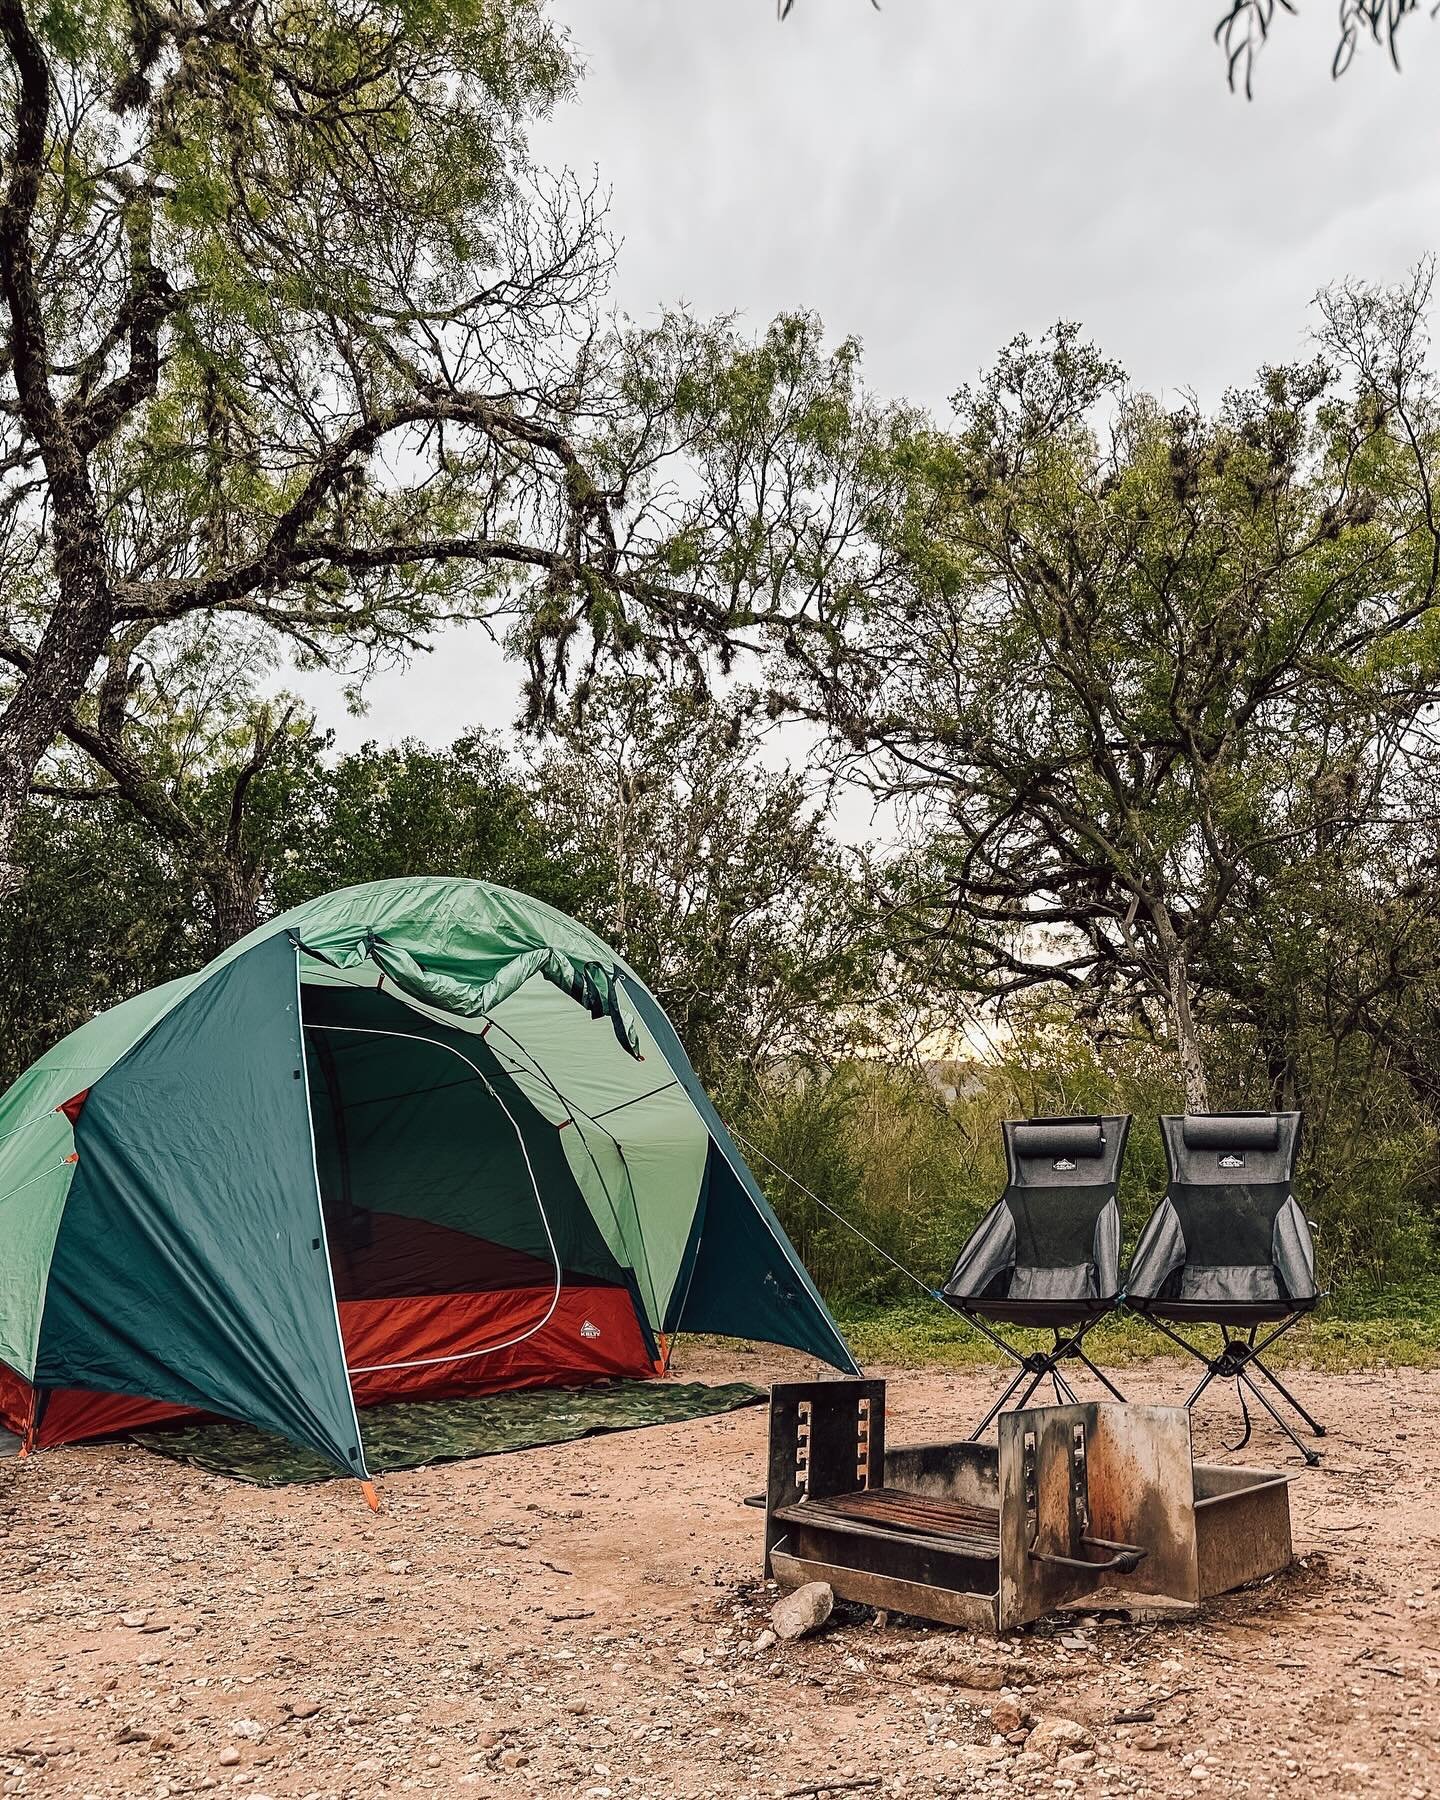 Home away from home where memories are made!🏕️
Camping with family and friends fills my cup. ☕💛

#everydayatxfamily #camping #1000hoursoutside #texastodo #kelty #garnerstatepark #camp #texasstateparks #wanderwheelstx #naturestudy #homeschoollife #t